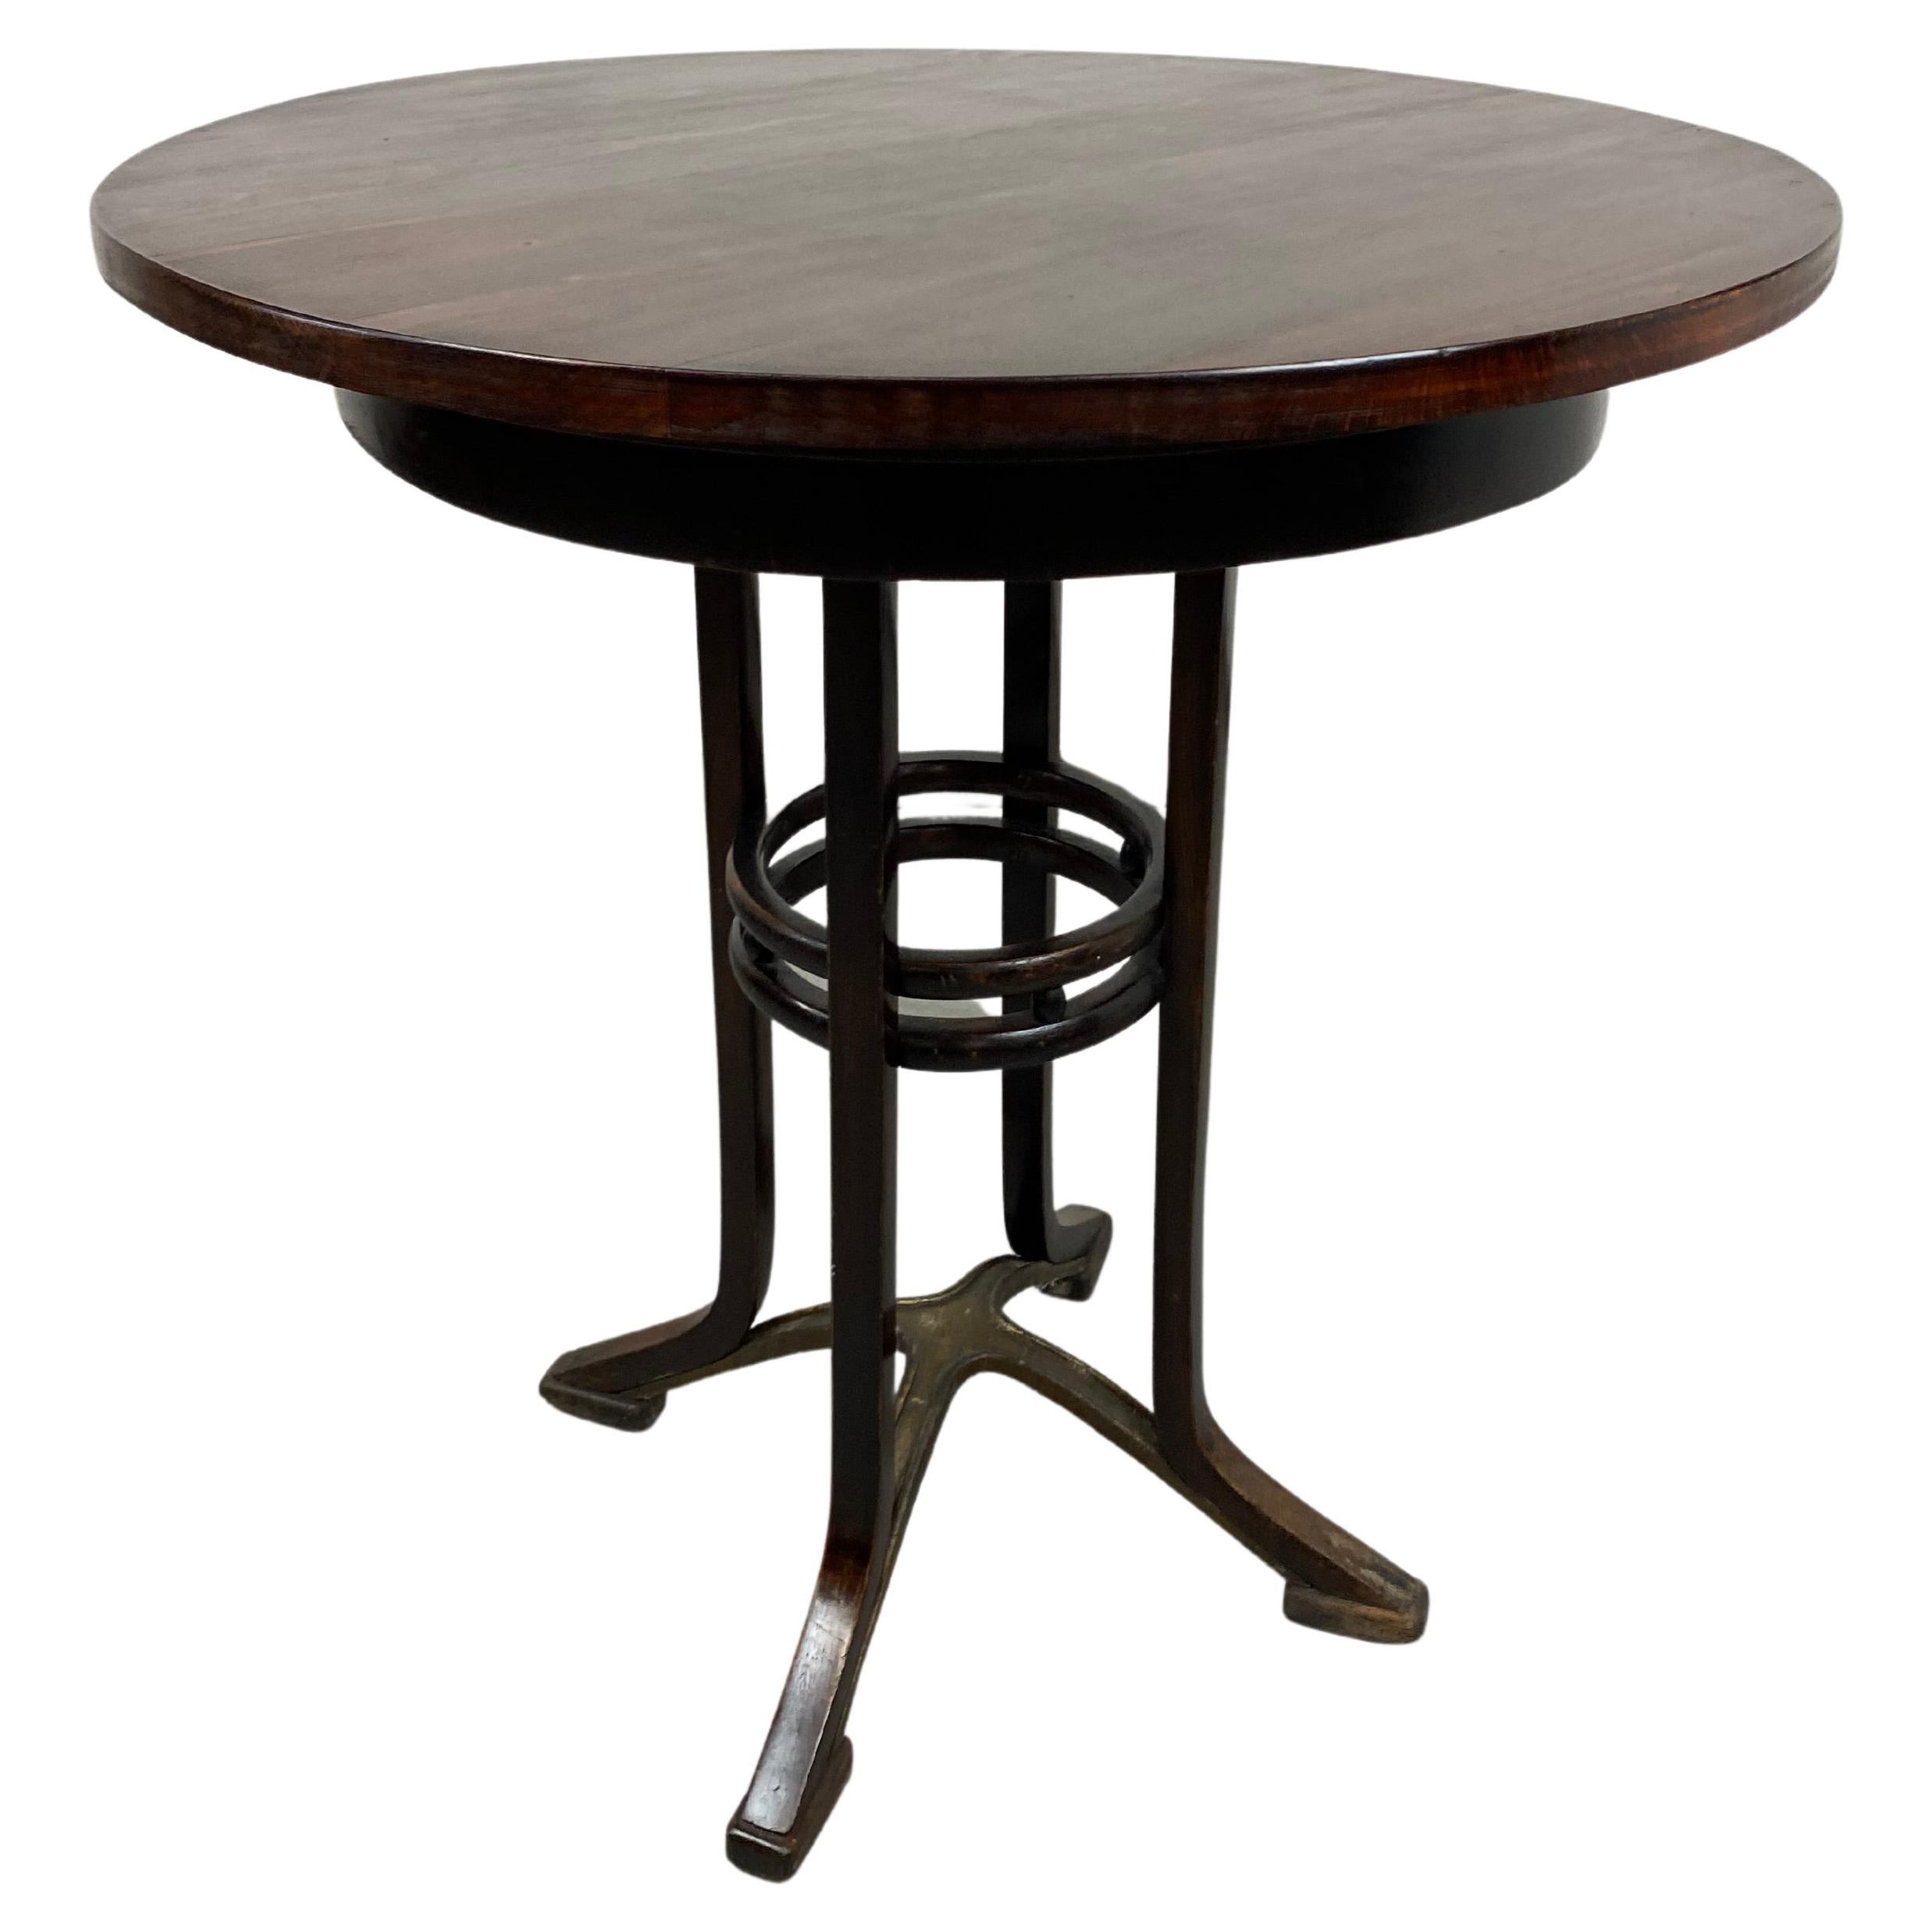 Thonet Table by Josef Hoffmann For Sale